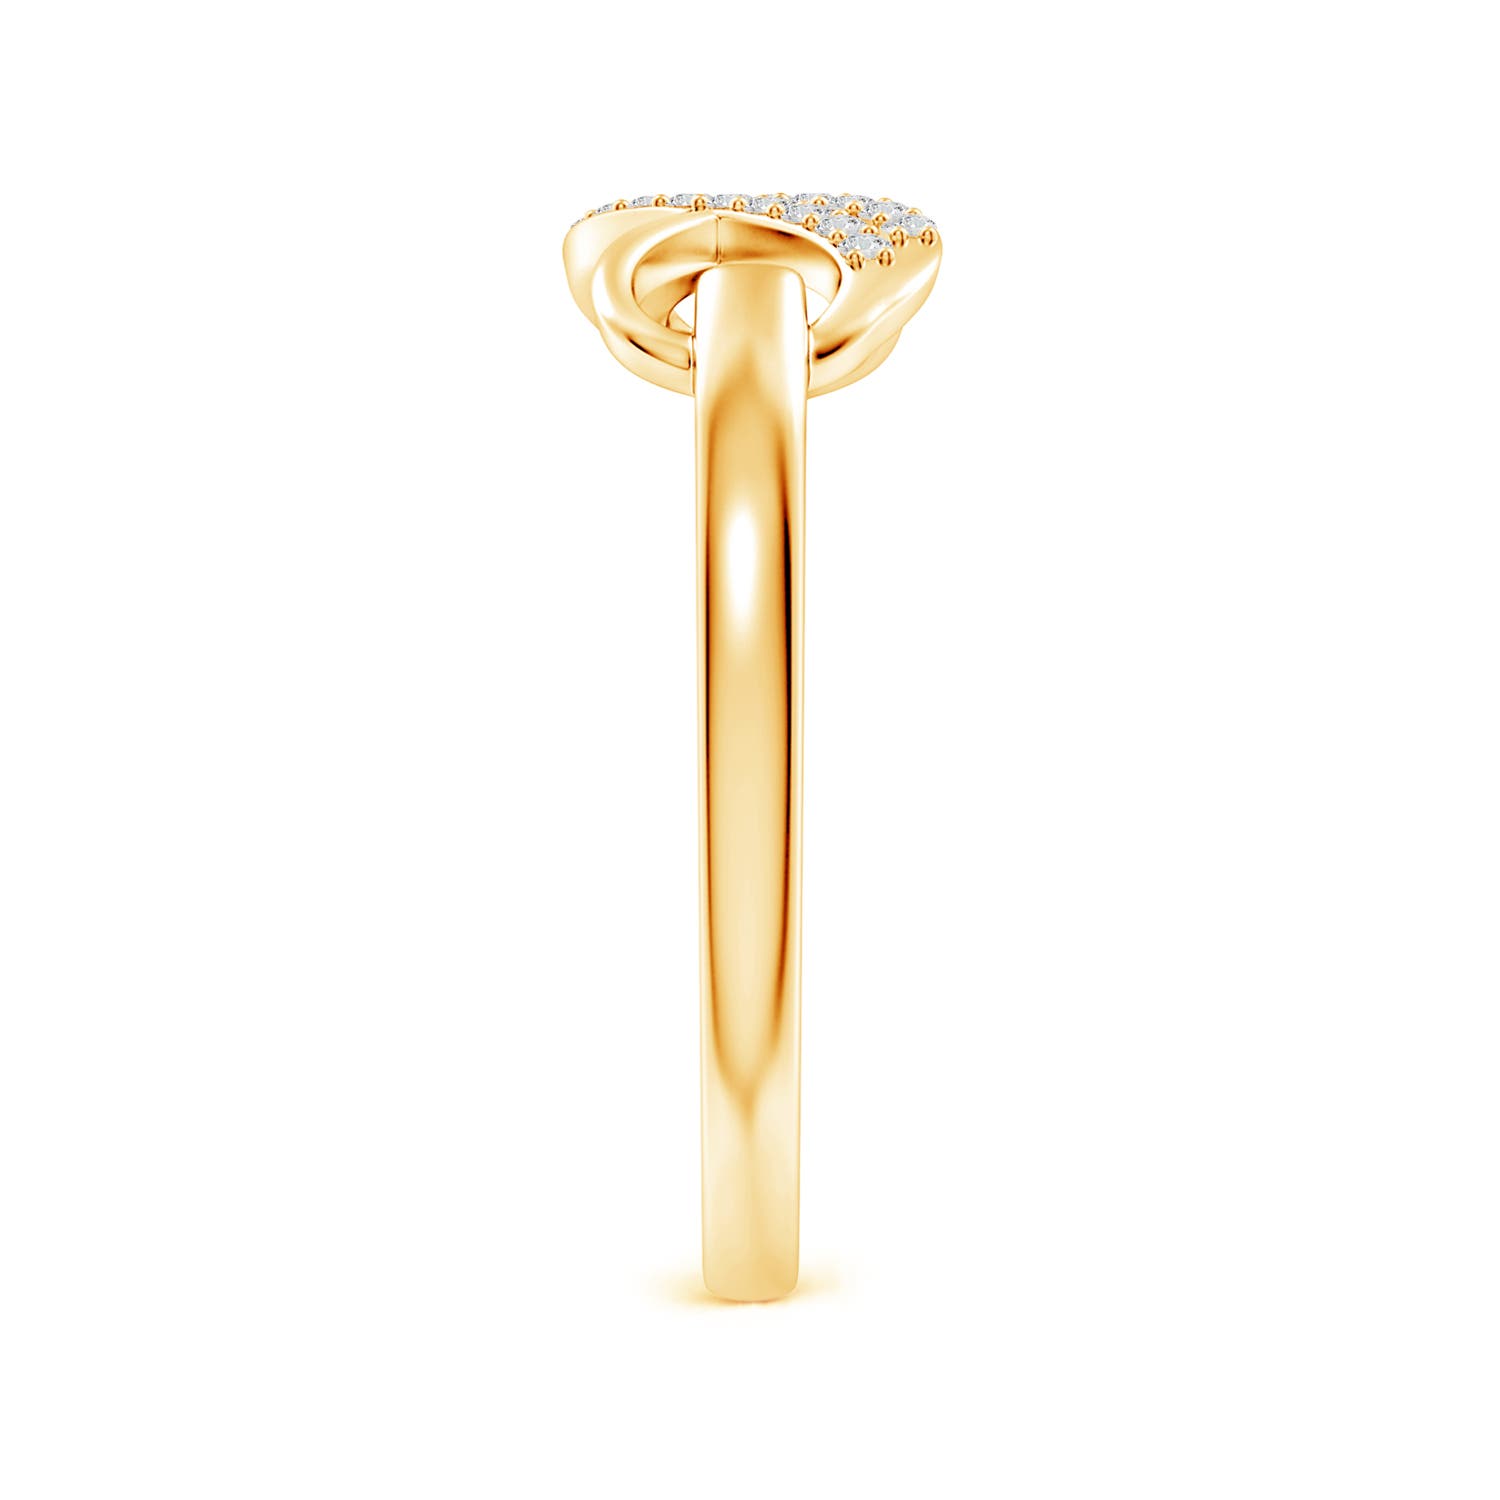 H, SI2 / 0.07 CT / 14 KT Yellow Gold